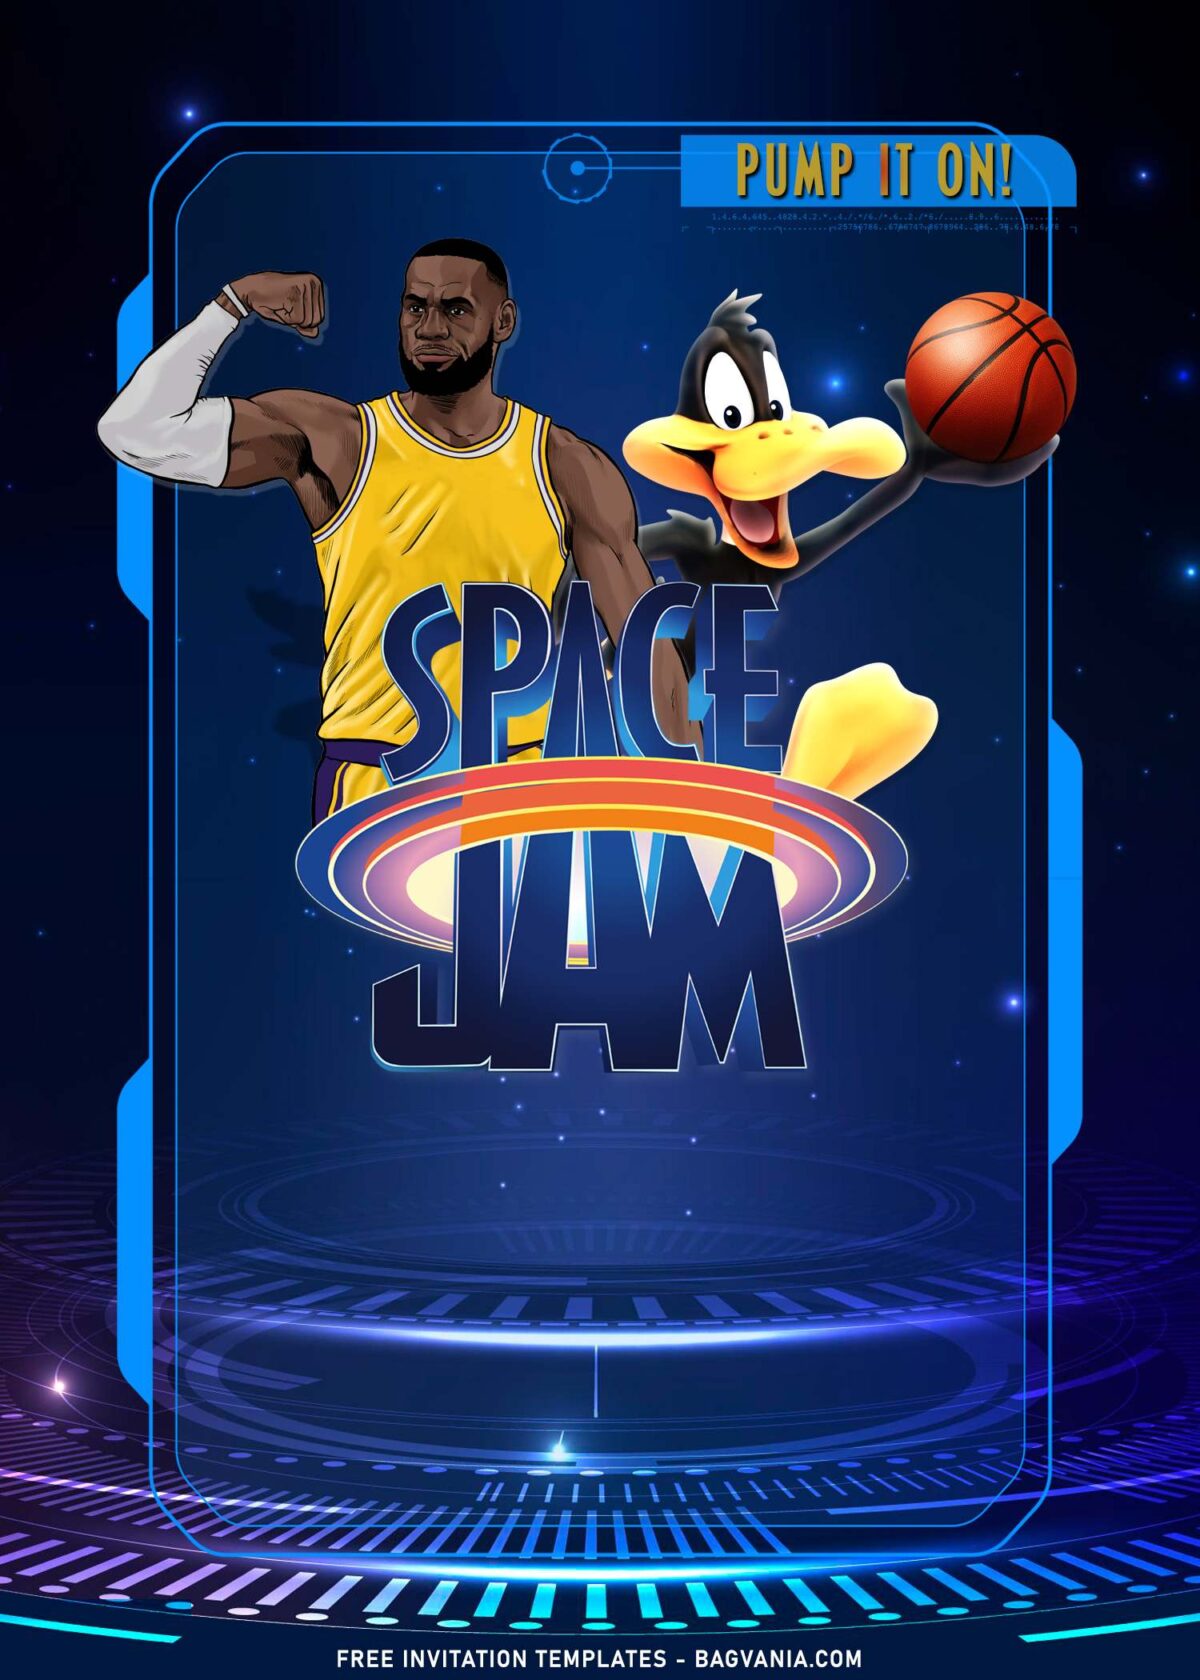 9+ Space Jam Birthday Invitation Templates For Kids Of All Ages with Cute Daffy Duck holding basketball